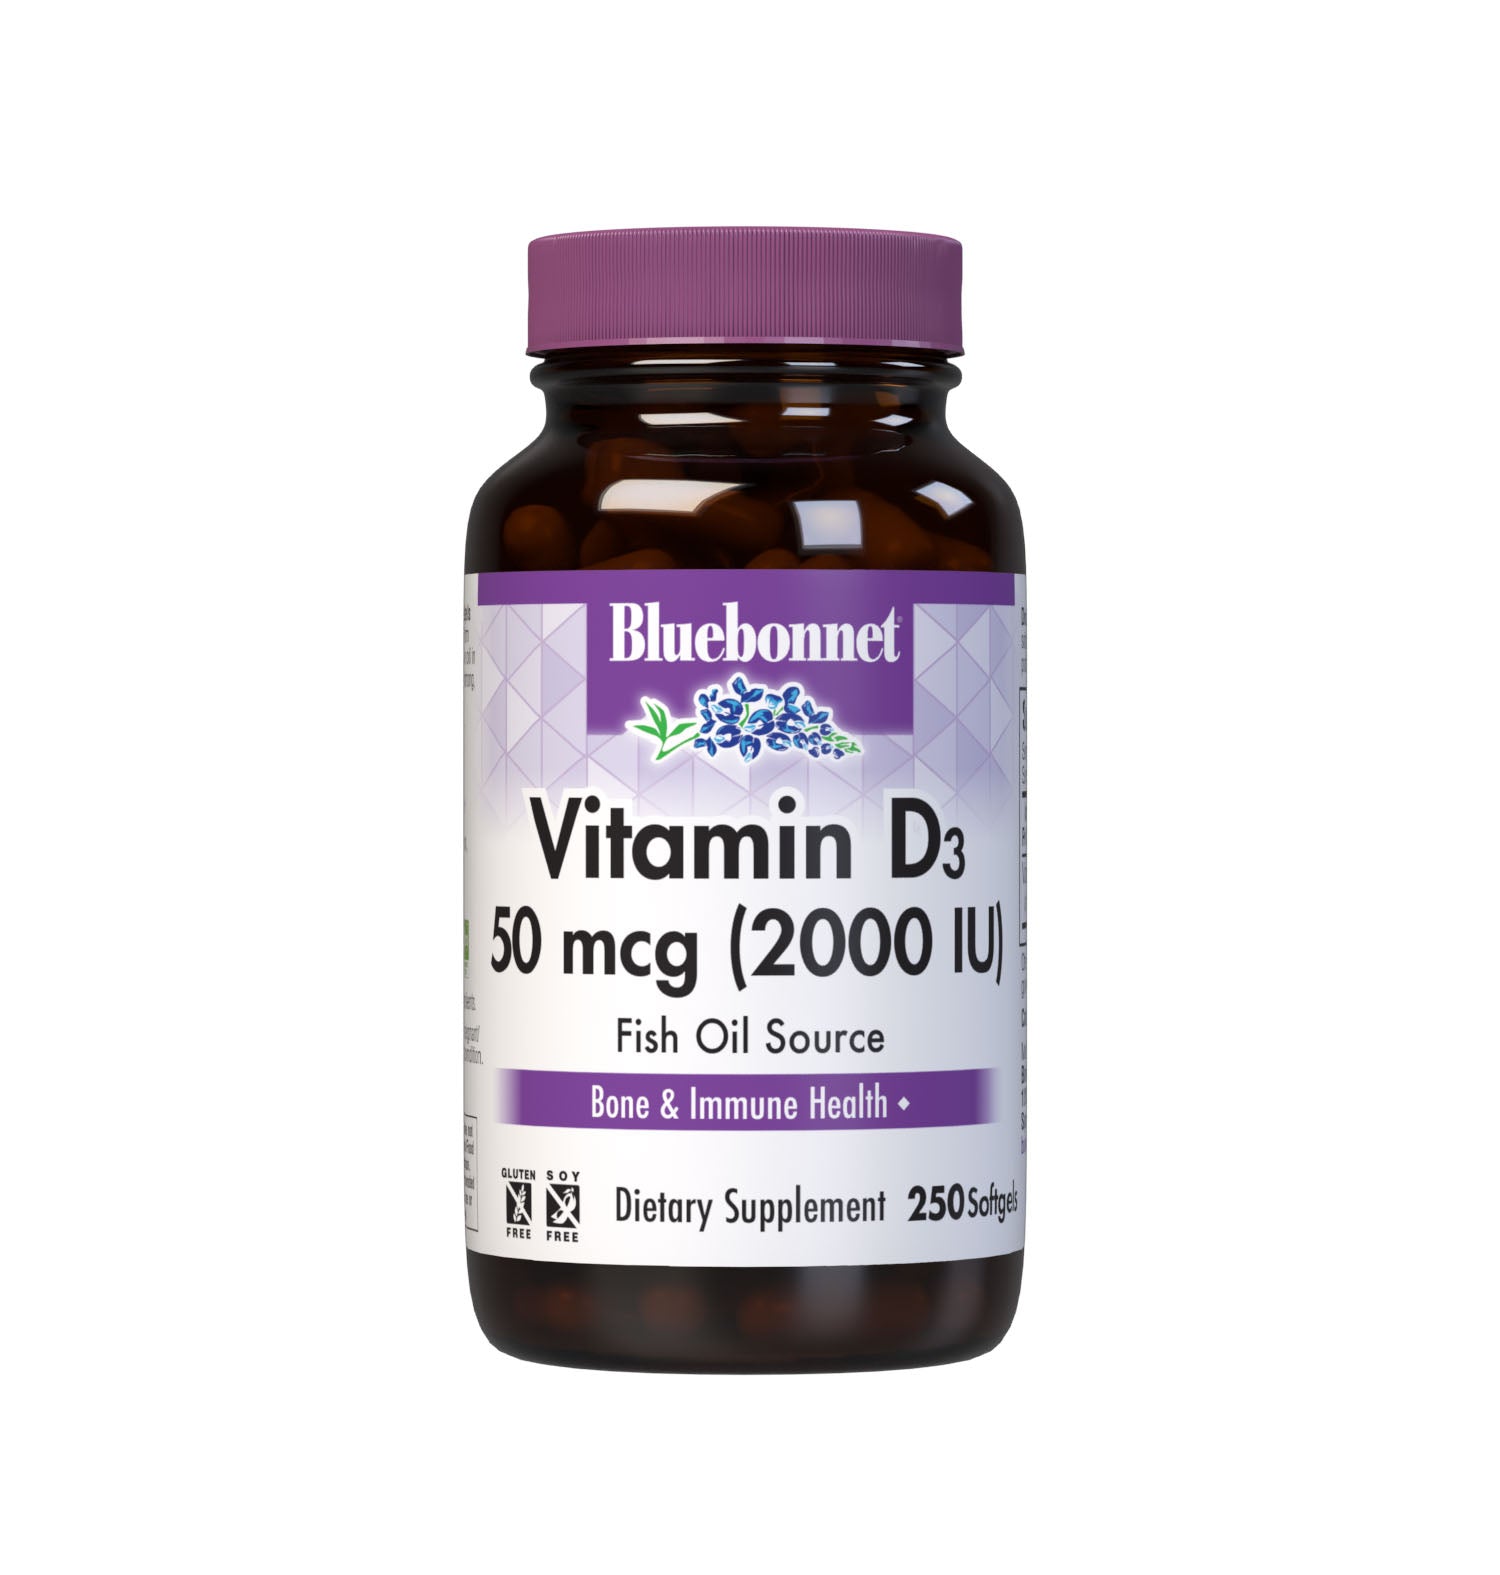 Bluebonnet’s Vitamin D3 50 mcg (2000 IU) Softgels are formulated with vitamin D3 (cholecalciferol) that supports strong healthy bones and immune function from molecularly distilled, deep sea, cold water, fish liver oil in a base of non-GMO safflower oil. #size_250 count